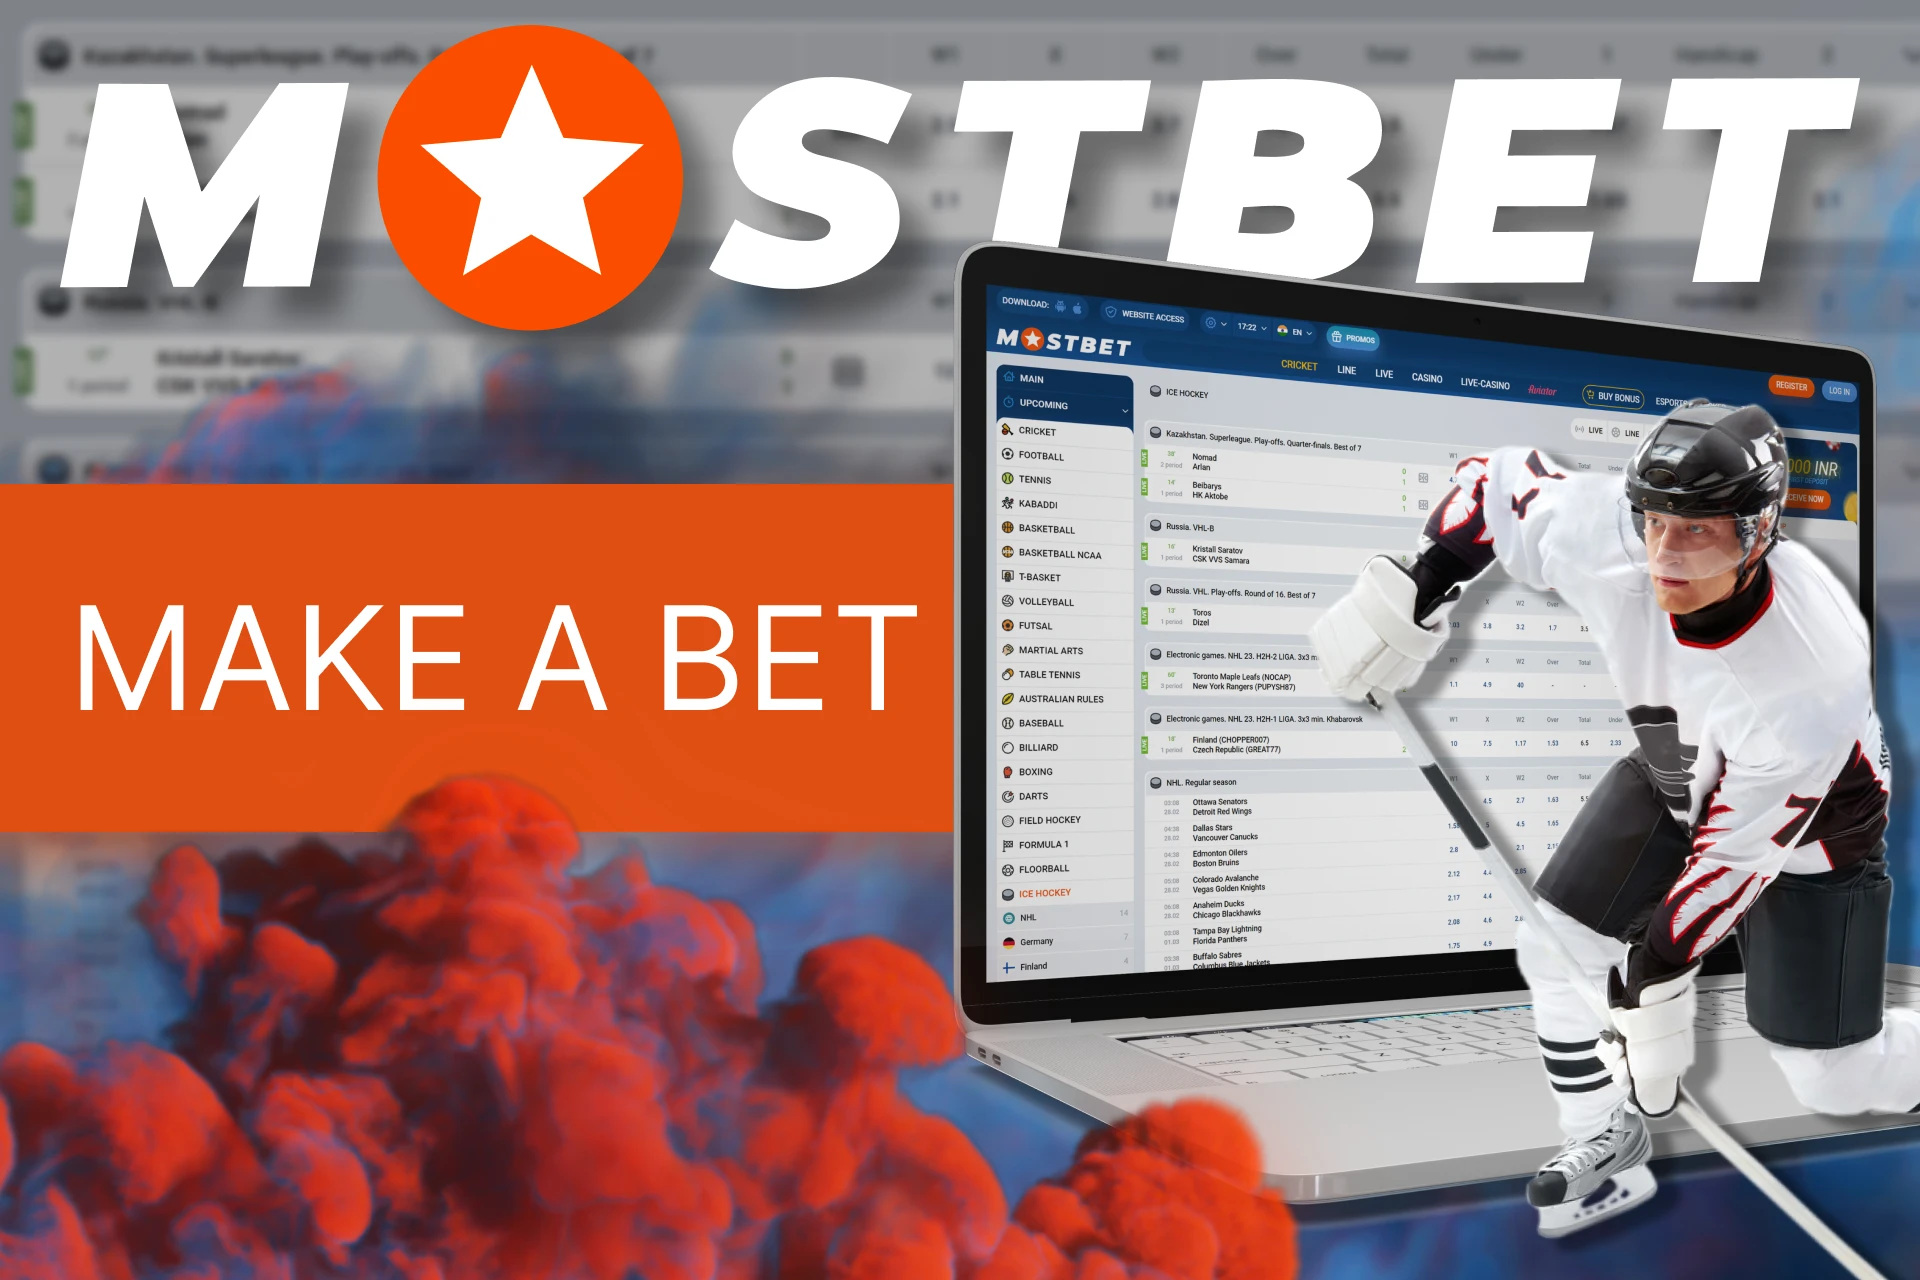 Bet on ice hockey online at Mostbet.